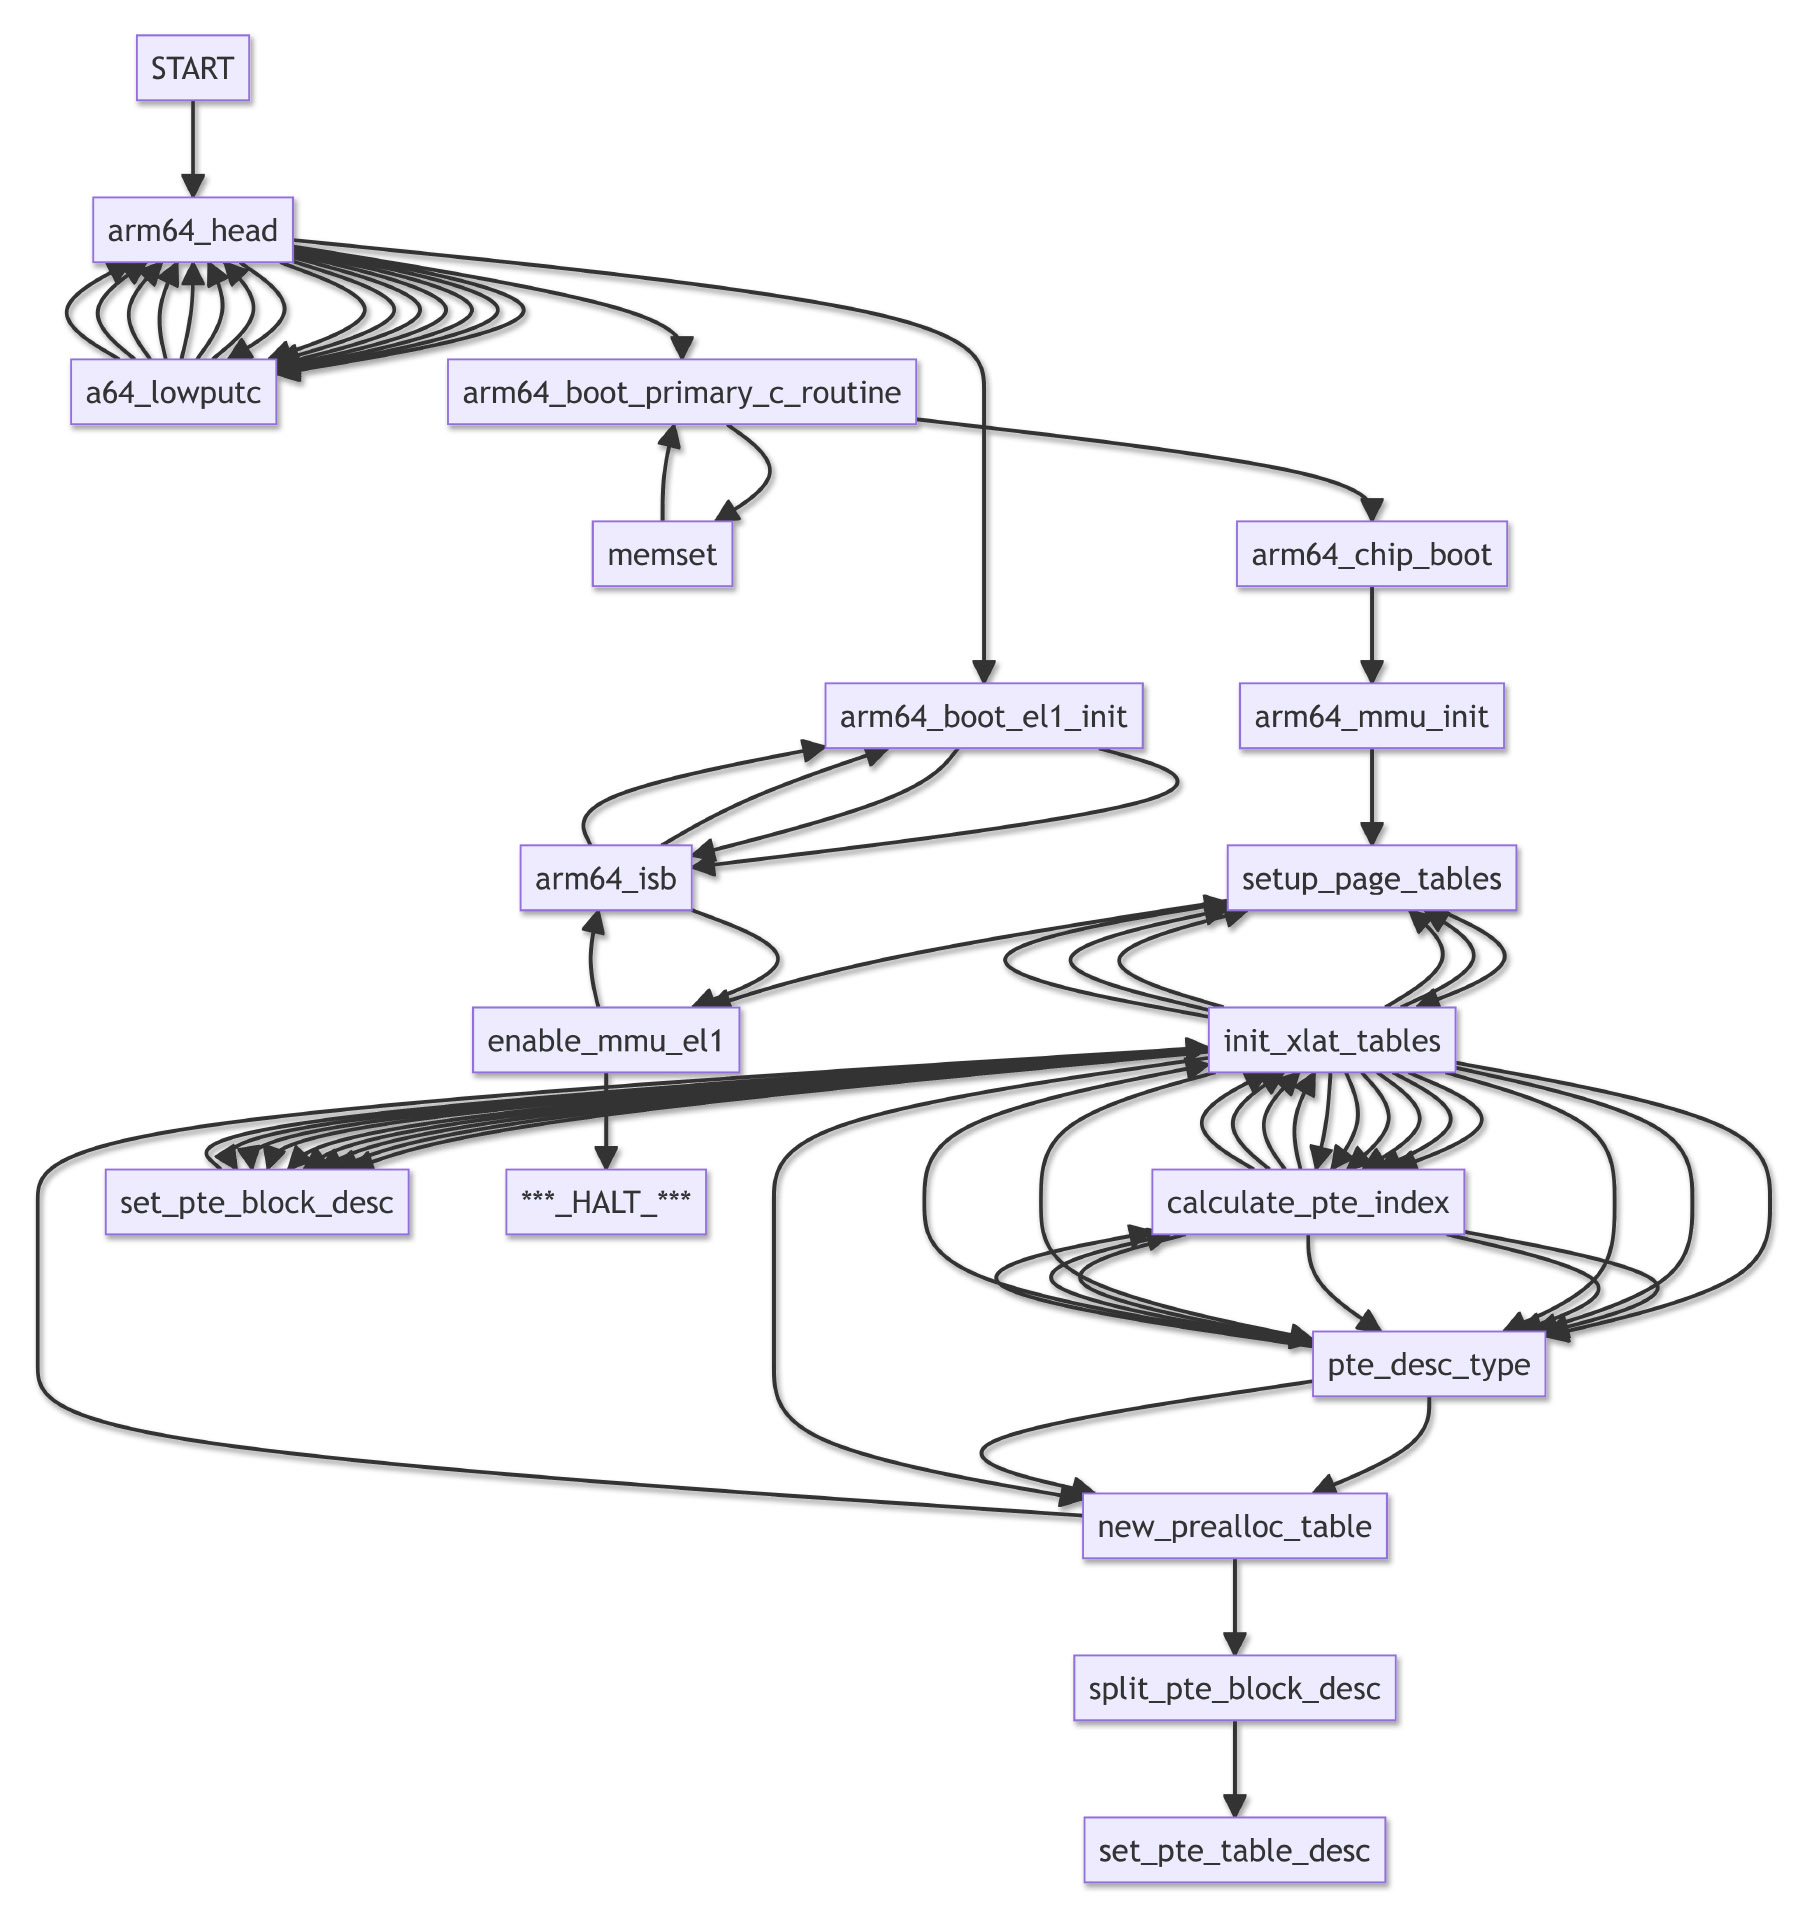 Call Graph for Apache NuttX Real-Time Operating System